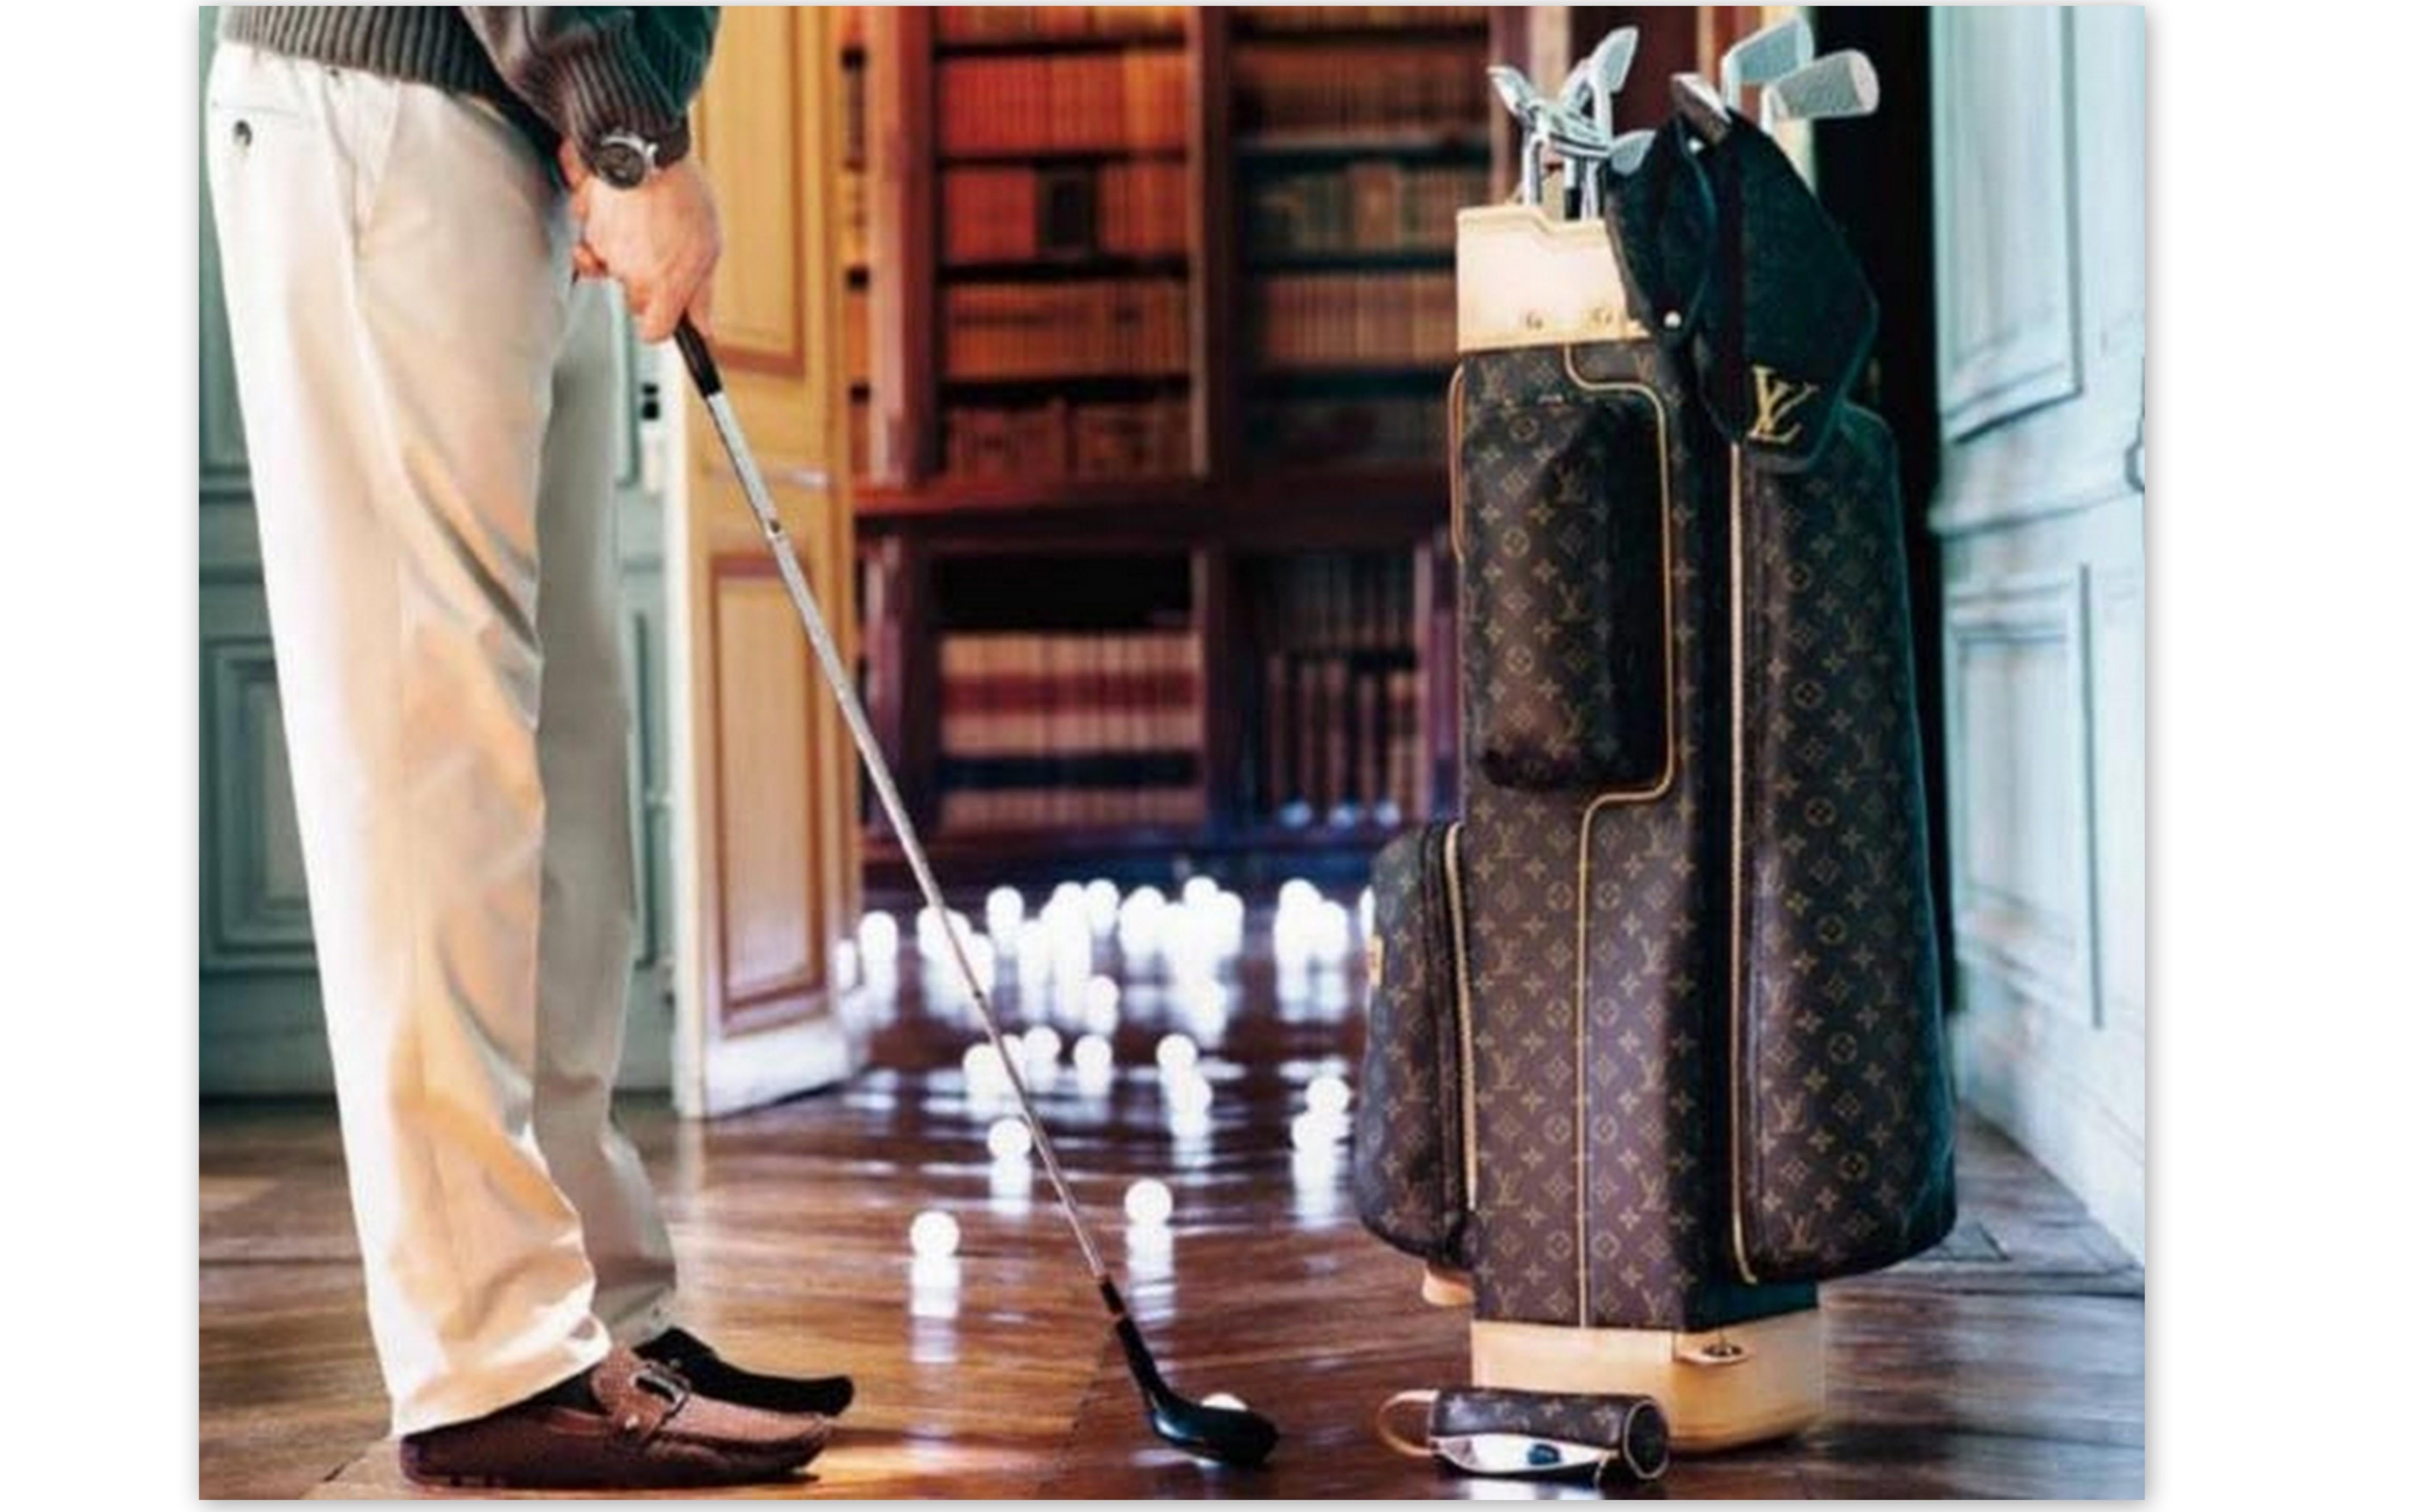 100% guaranteed authentic LOUIS VUITTON Monogram golf bag.

RIGHT NOW RETIAL AT LV STORE FOR DAMIER PRINT GOLF BAG RETAIL  AROUND  $24,000 

This stylish golf bag is crafted of Louis Vuitton monogram on toile canvas with natural cowhide leather and